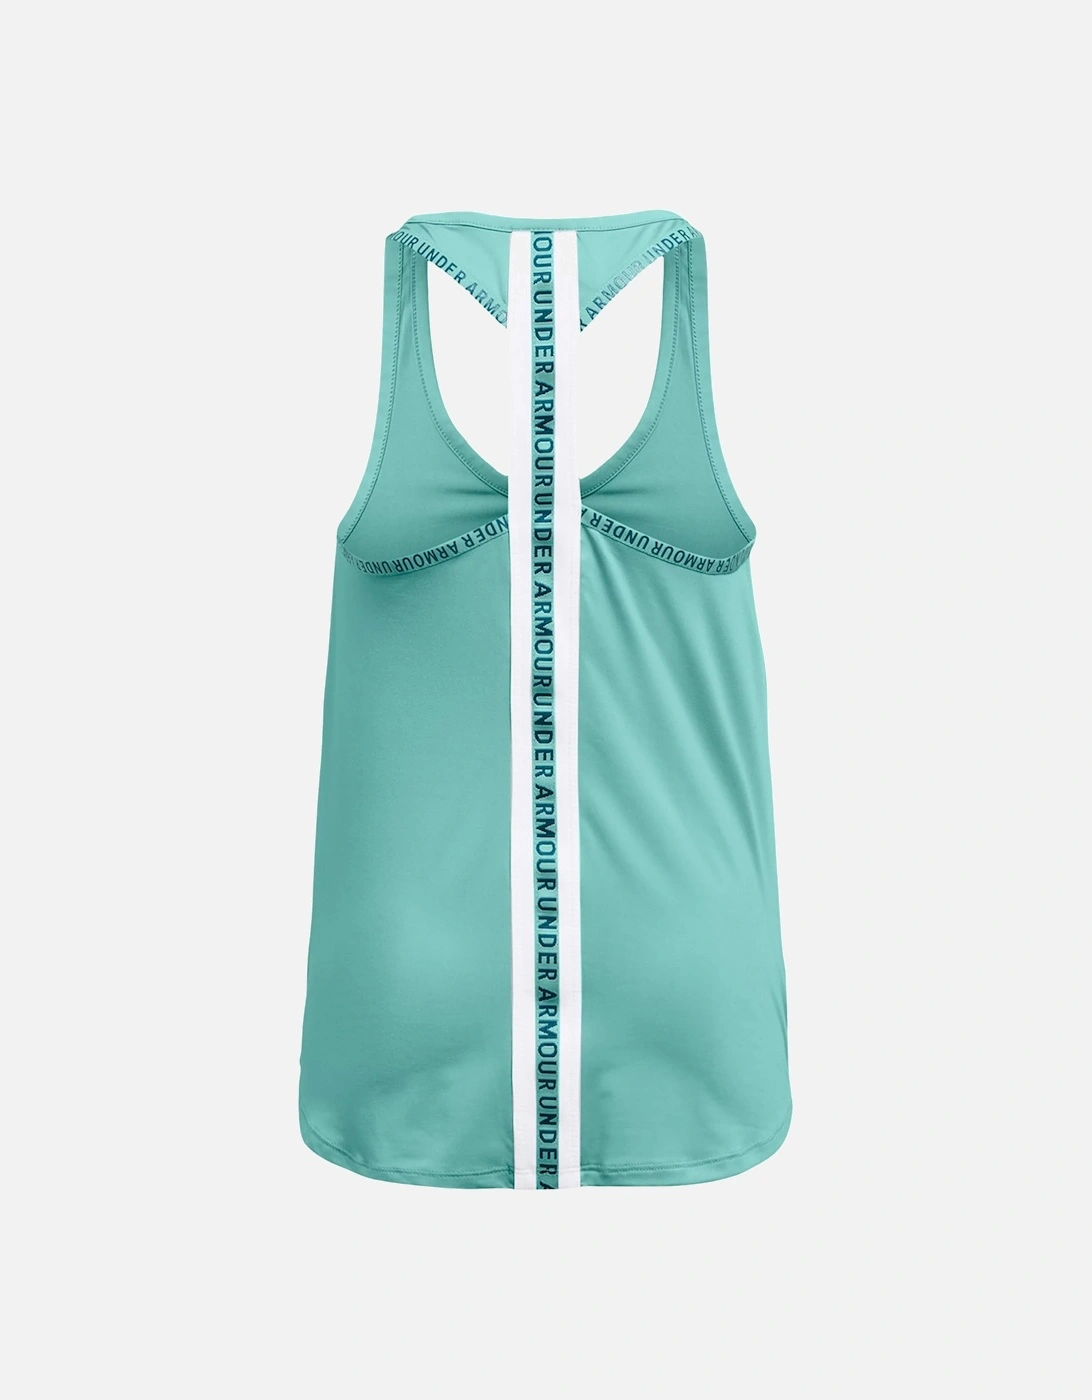 Girls Knockout Tank Top (Turquoise)